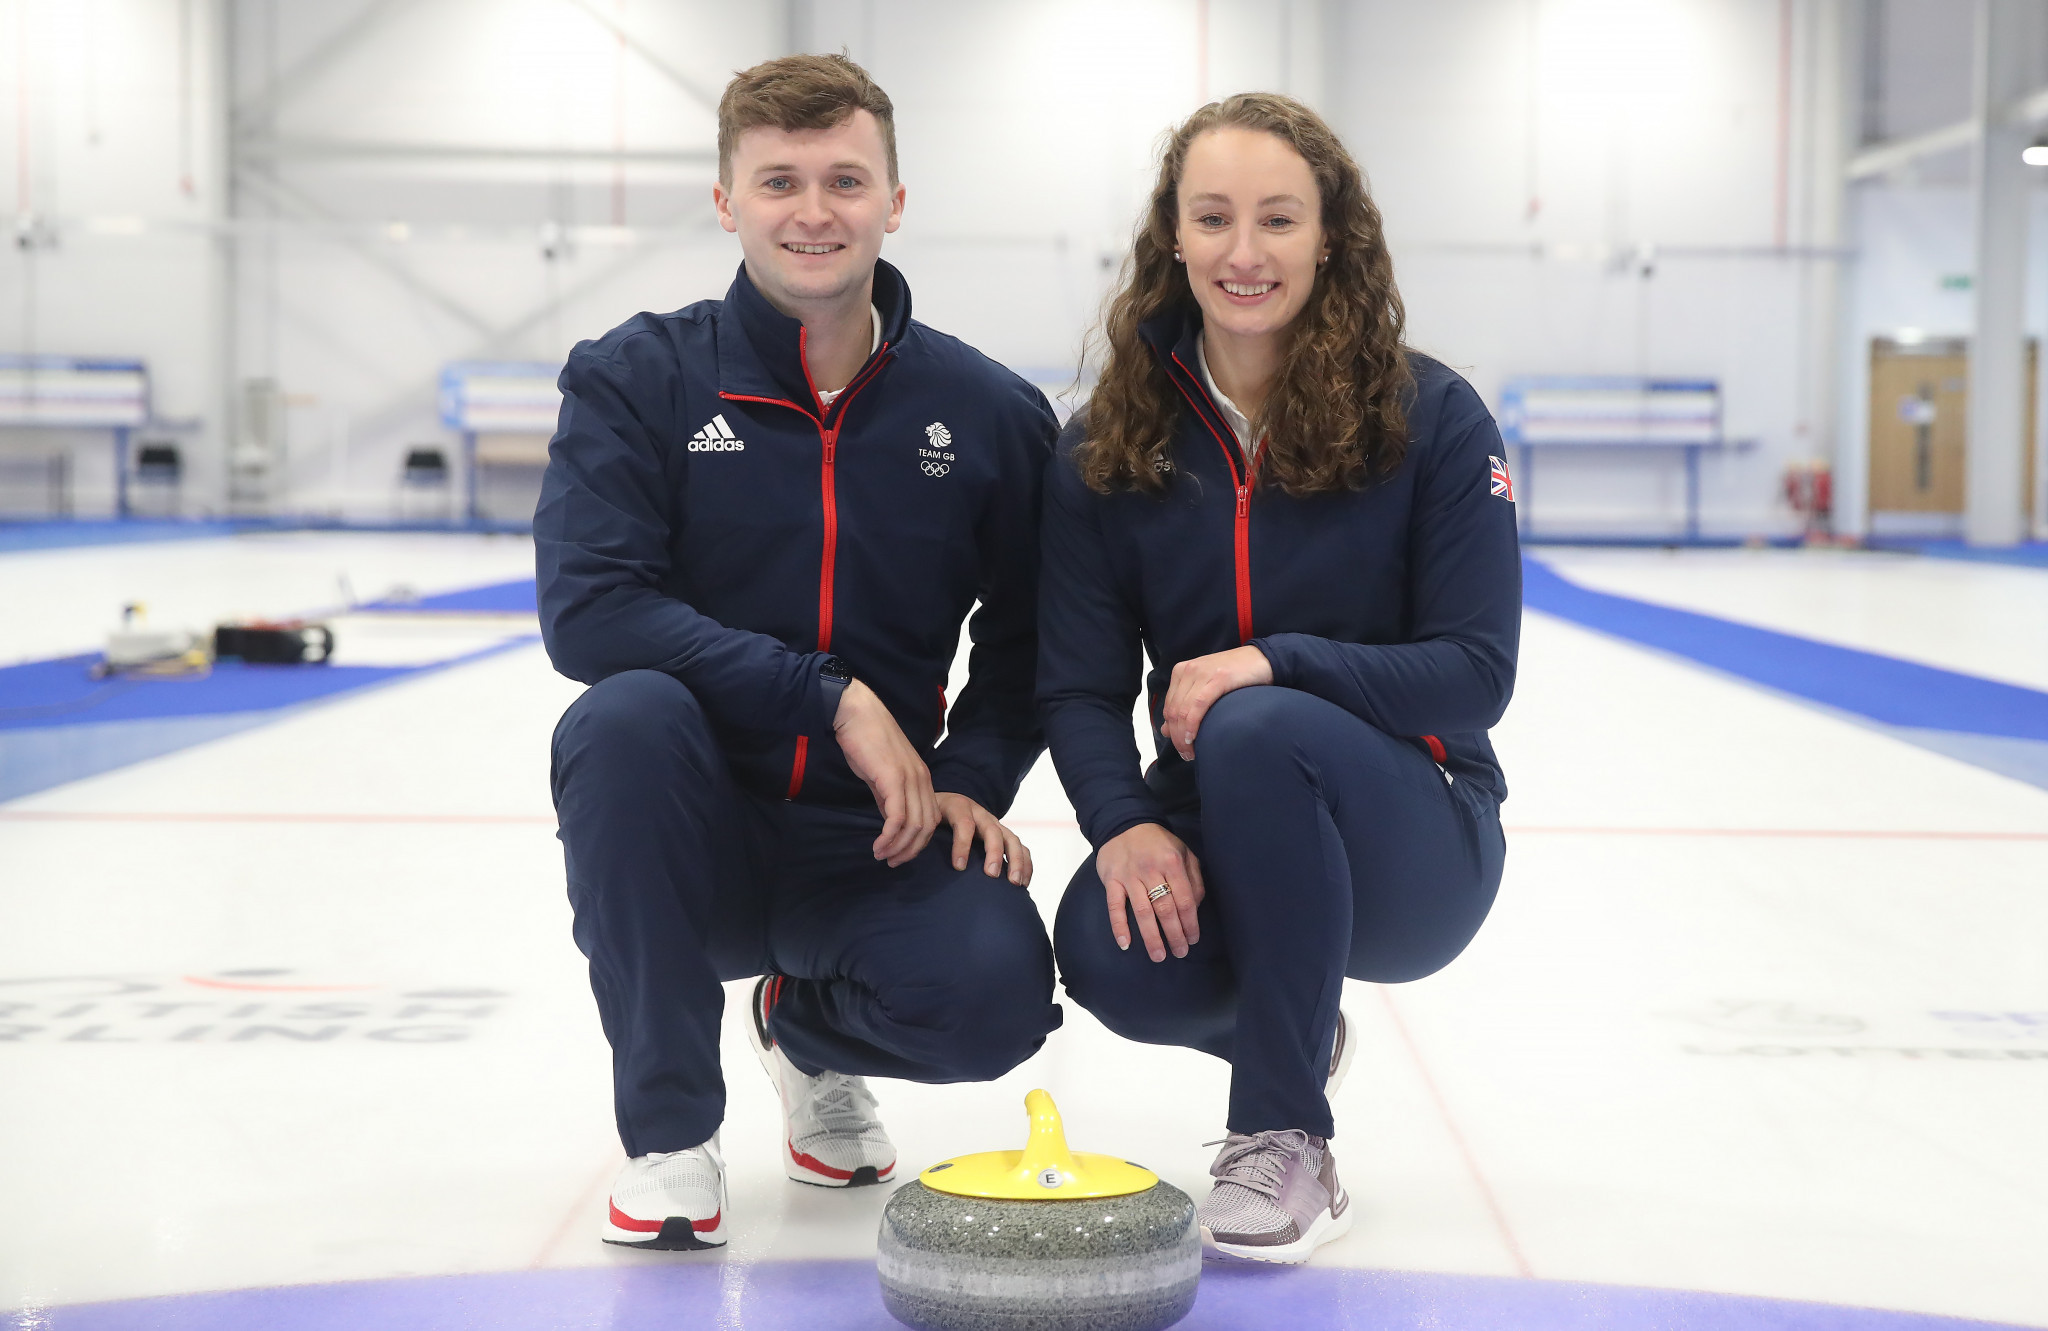 Geneva to hold World Mixed Doubles Curling Championship in 2022